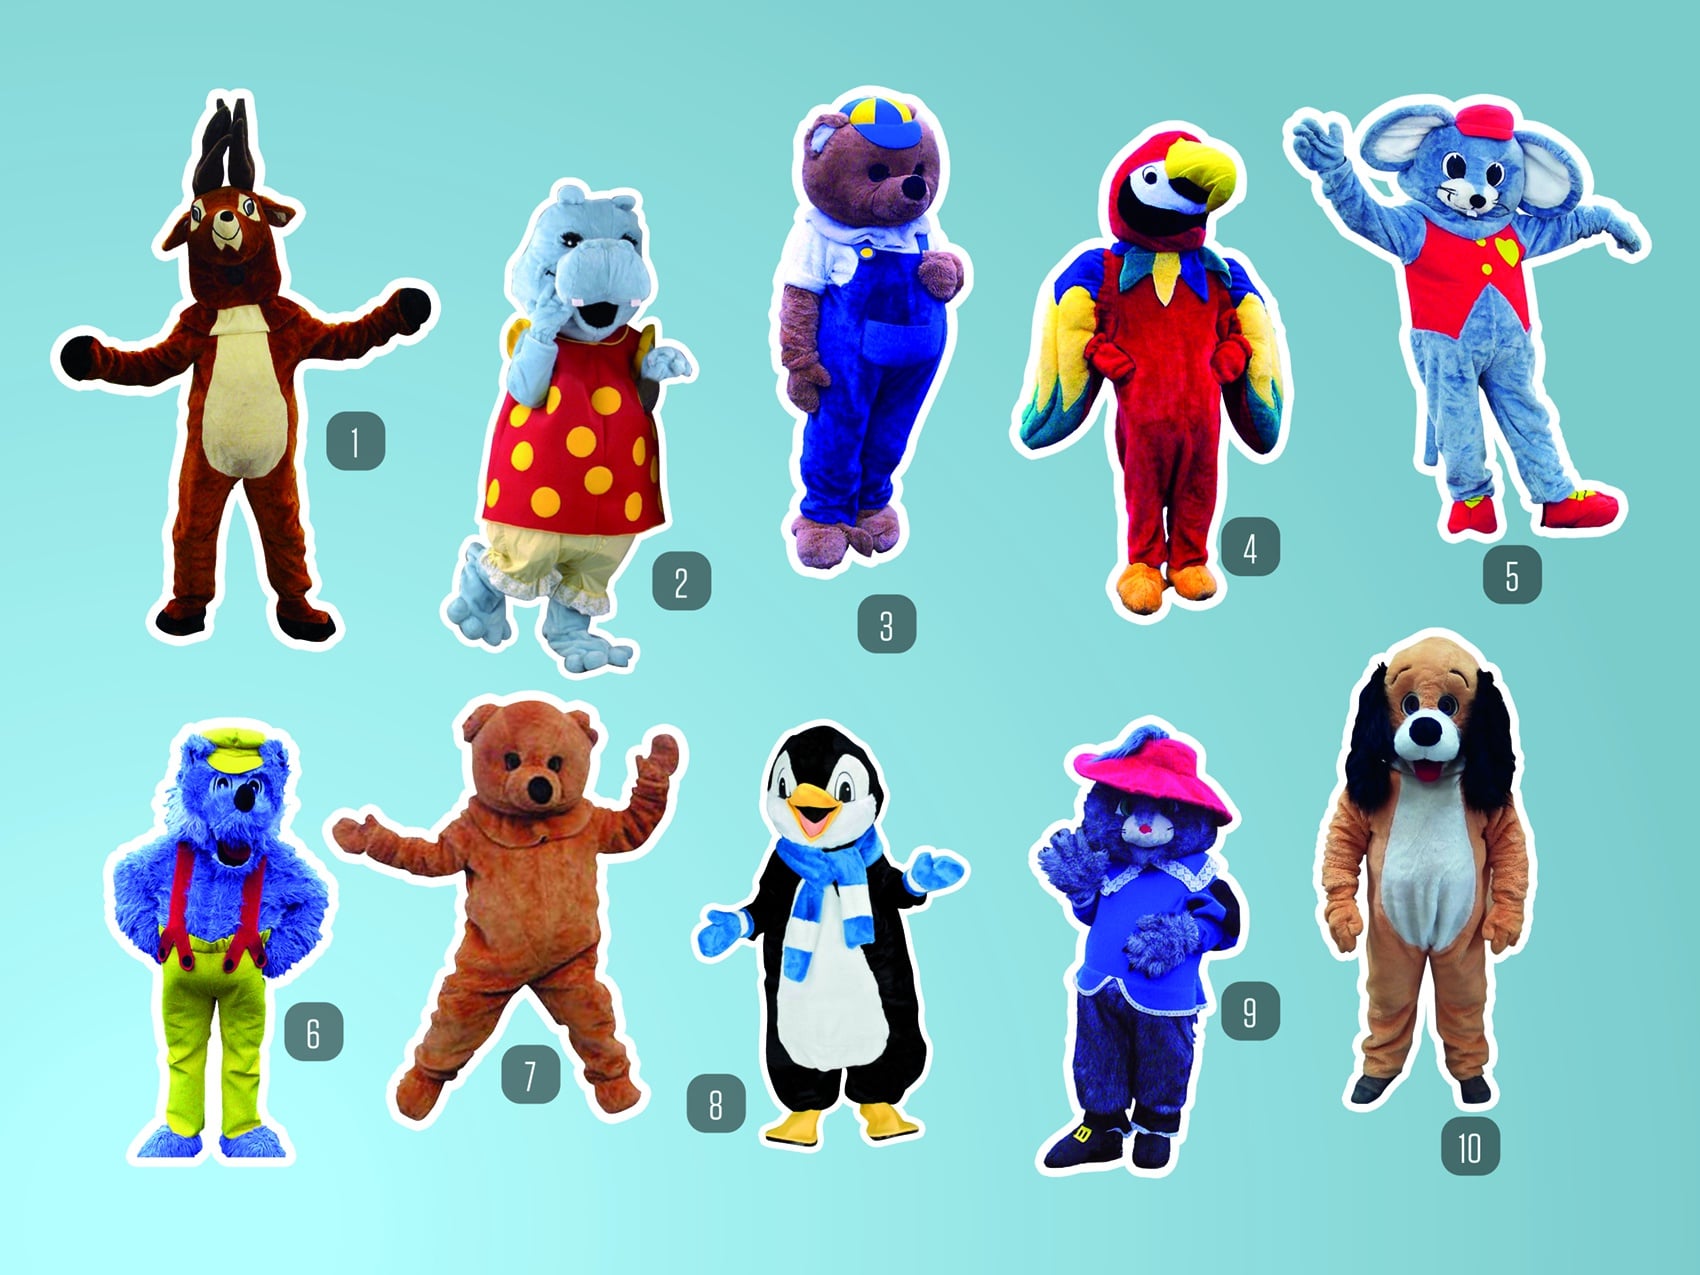 costumes-peluches-animations-loisirs-location-tenue-deguisements2